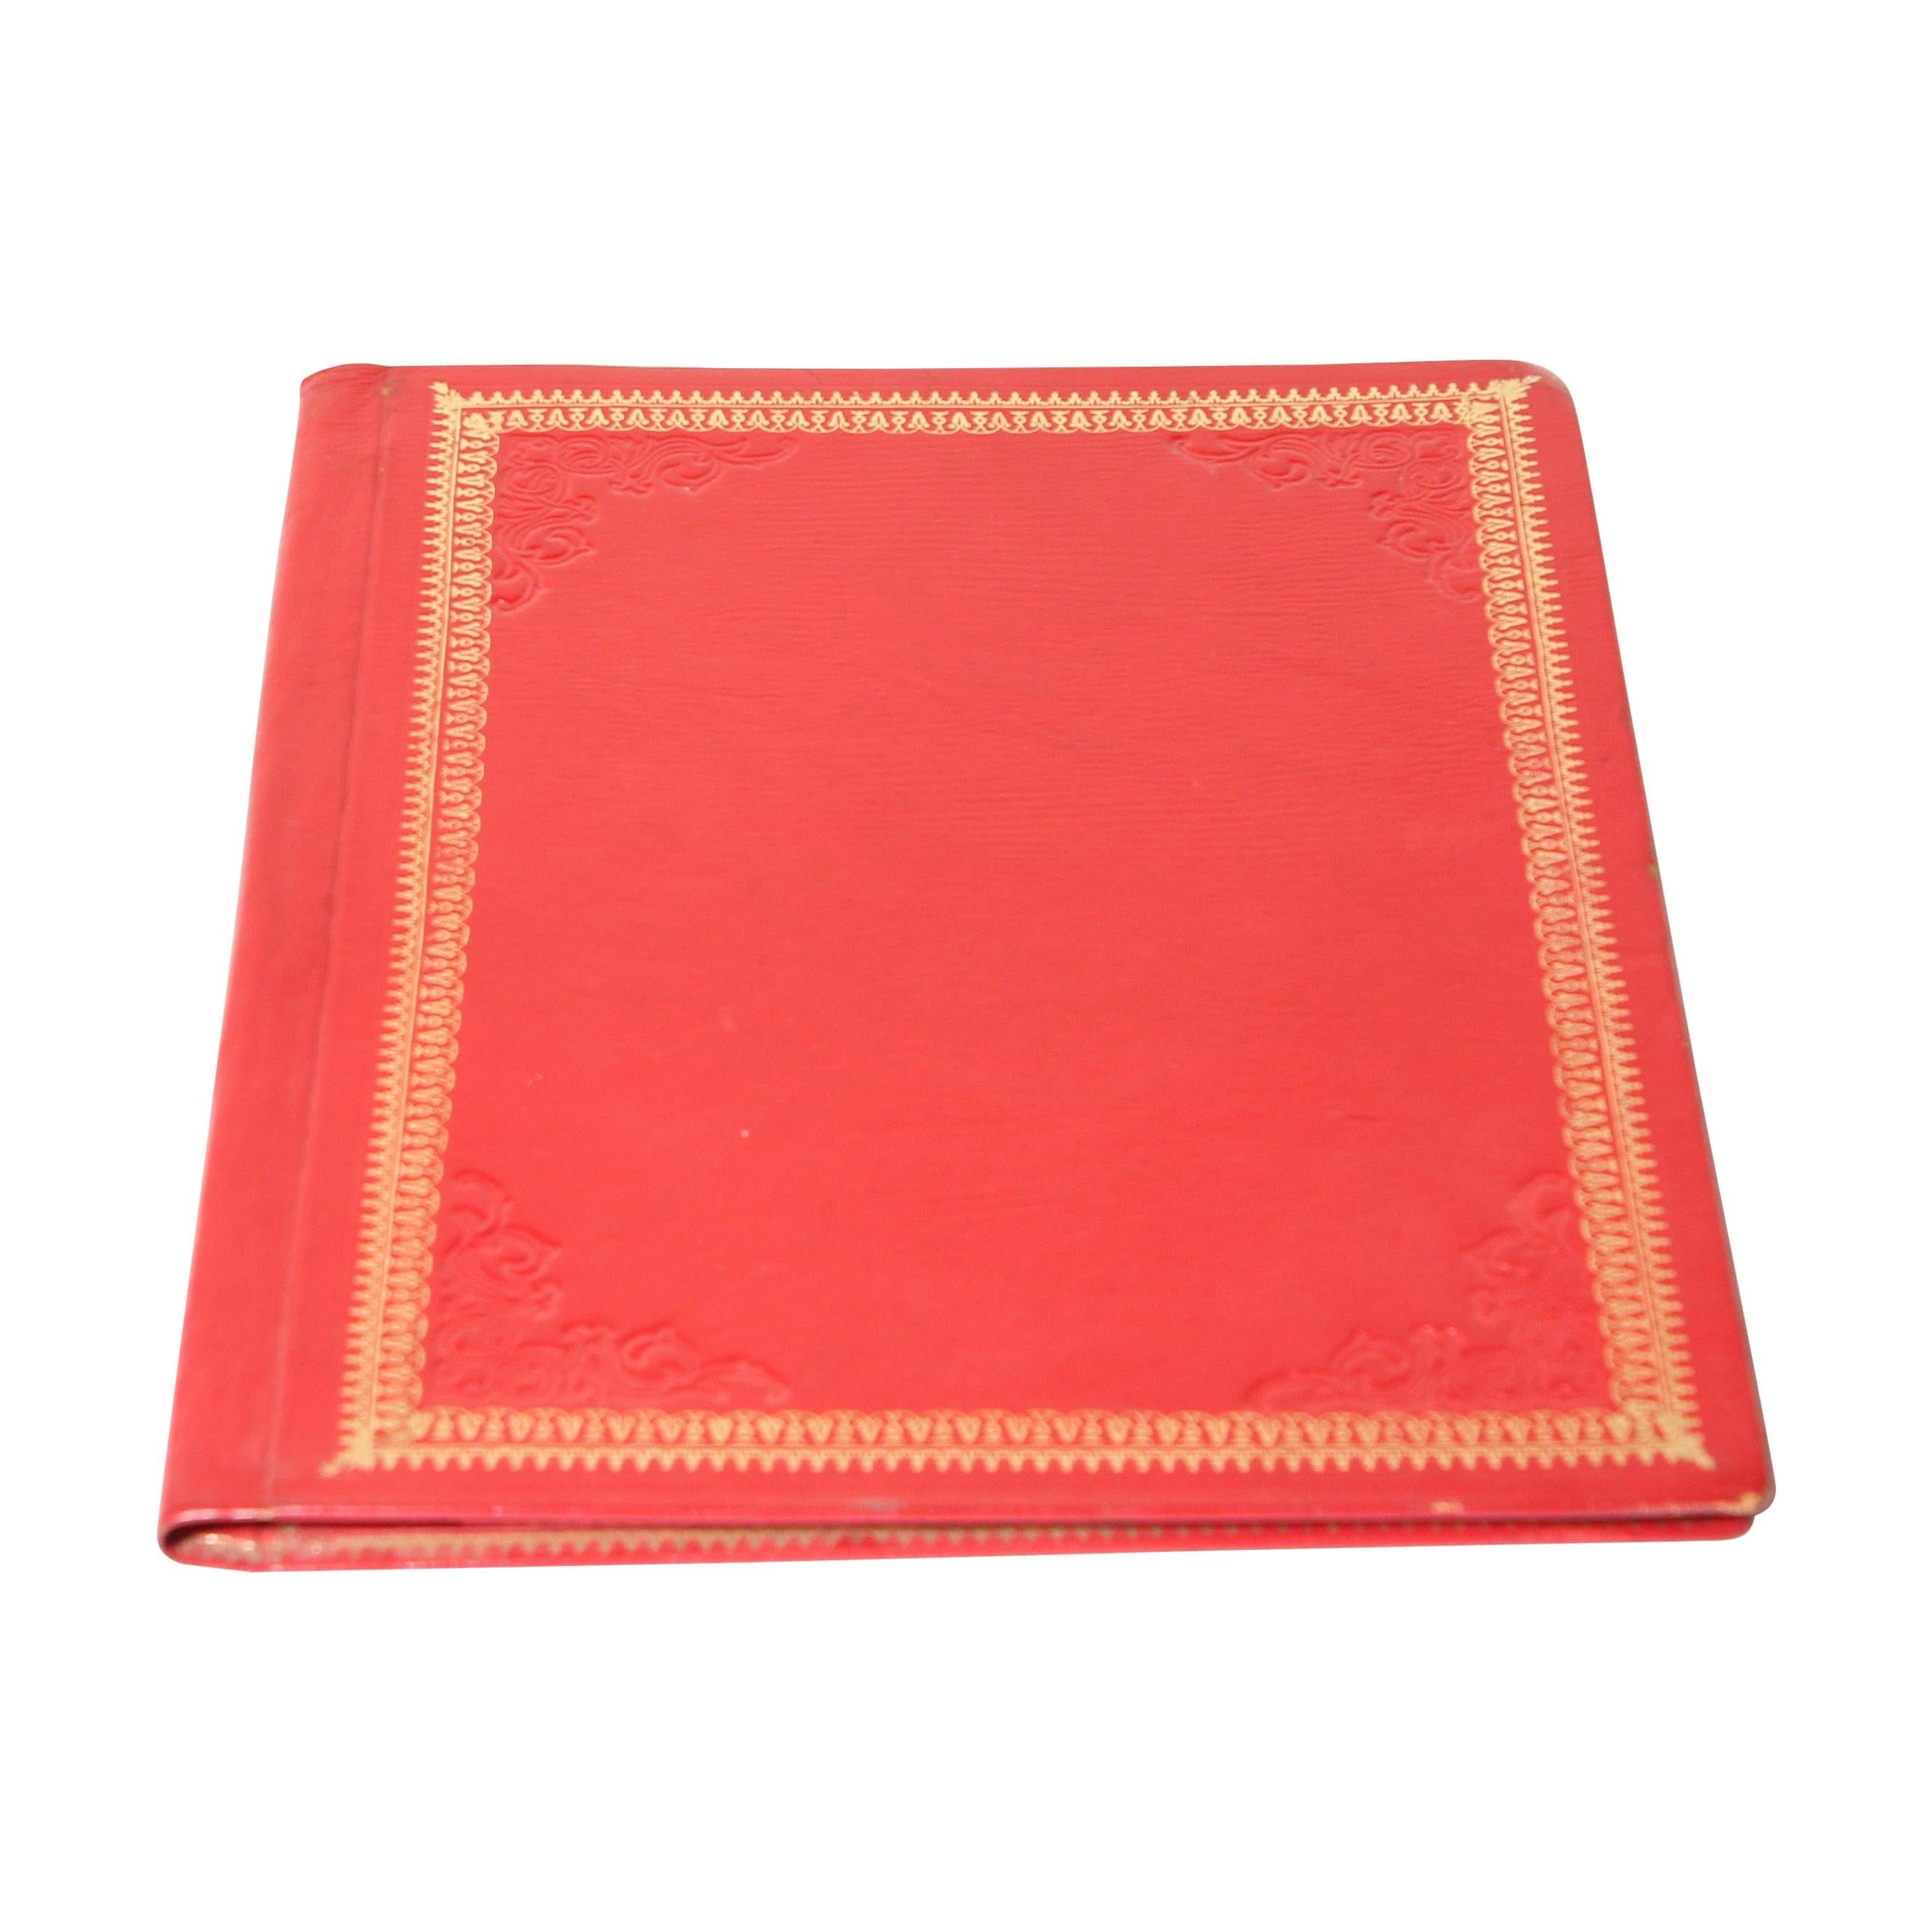 Vintage Moroccan Embossed Leather Padfolio For Sale